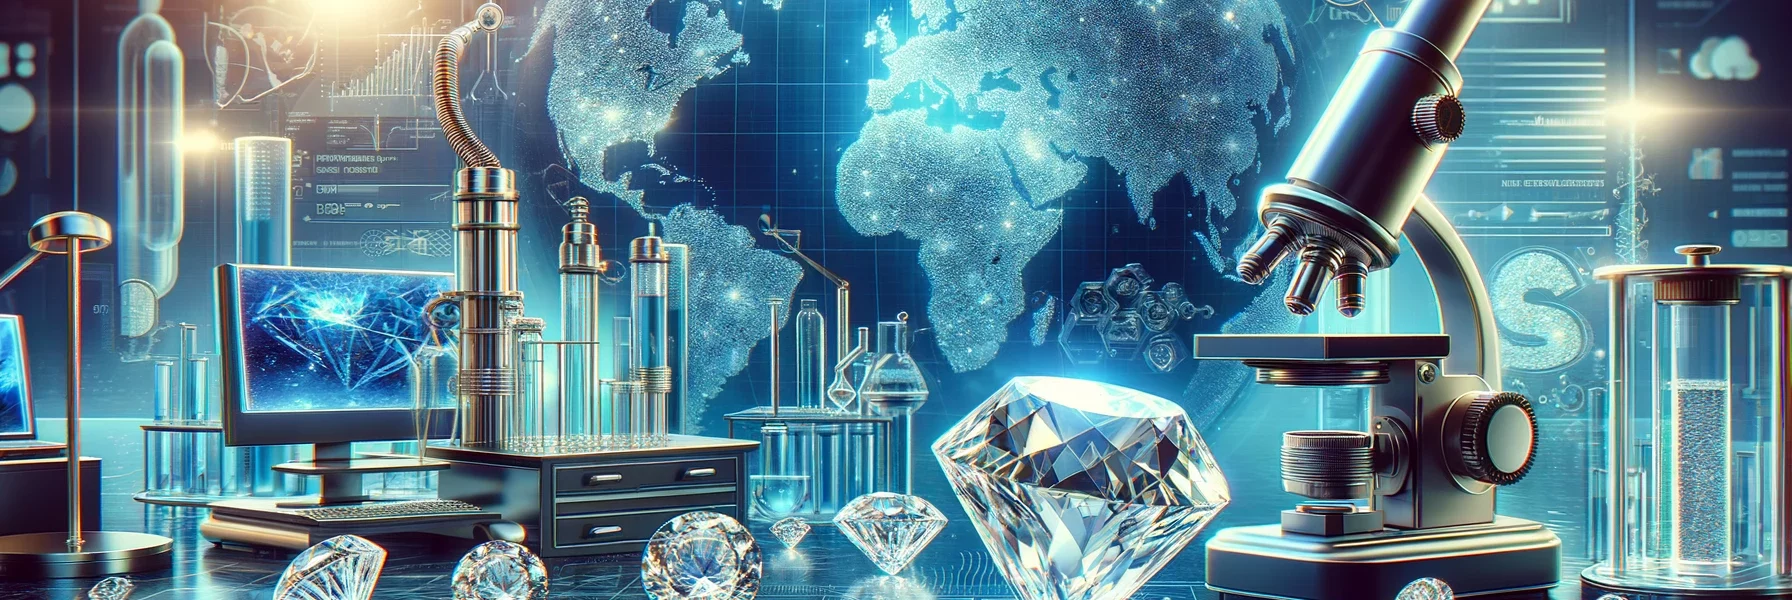 Rise Of Lab-Grown Diamonds In India: A Sleek, High-Tech Laboratory Scene Showcasing Clear, Glowing Lab-Grown Diamonds With Advanced Scientific Equipment And A Subtle Global Map In The Background.